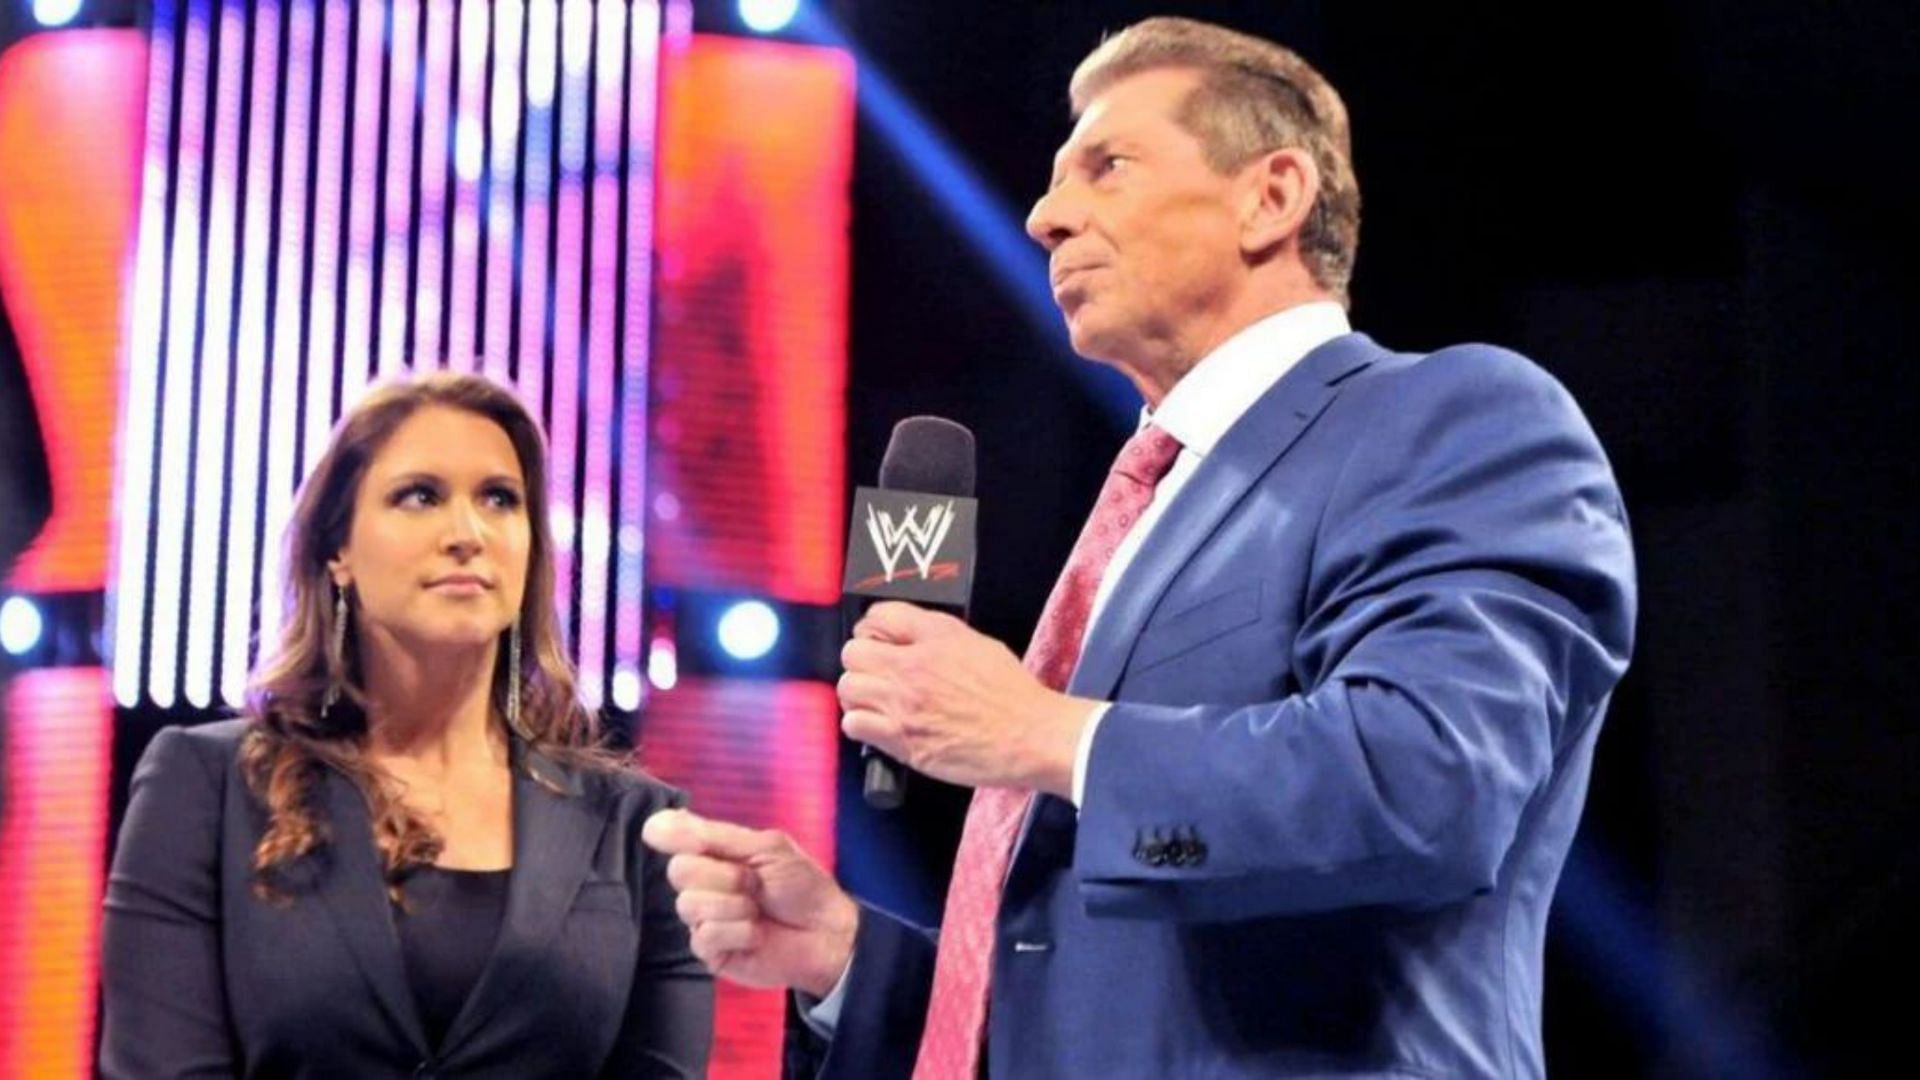 Stephanie and Vince McMahon had some disagreements